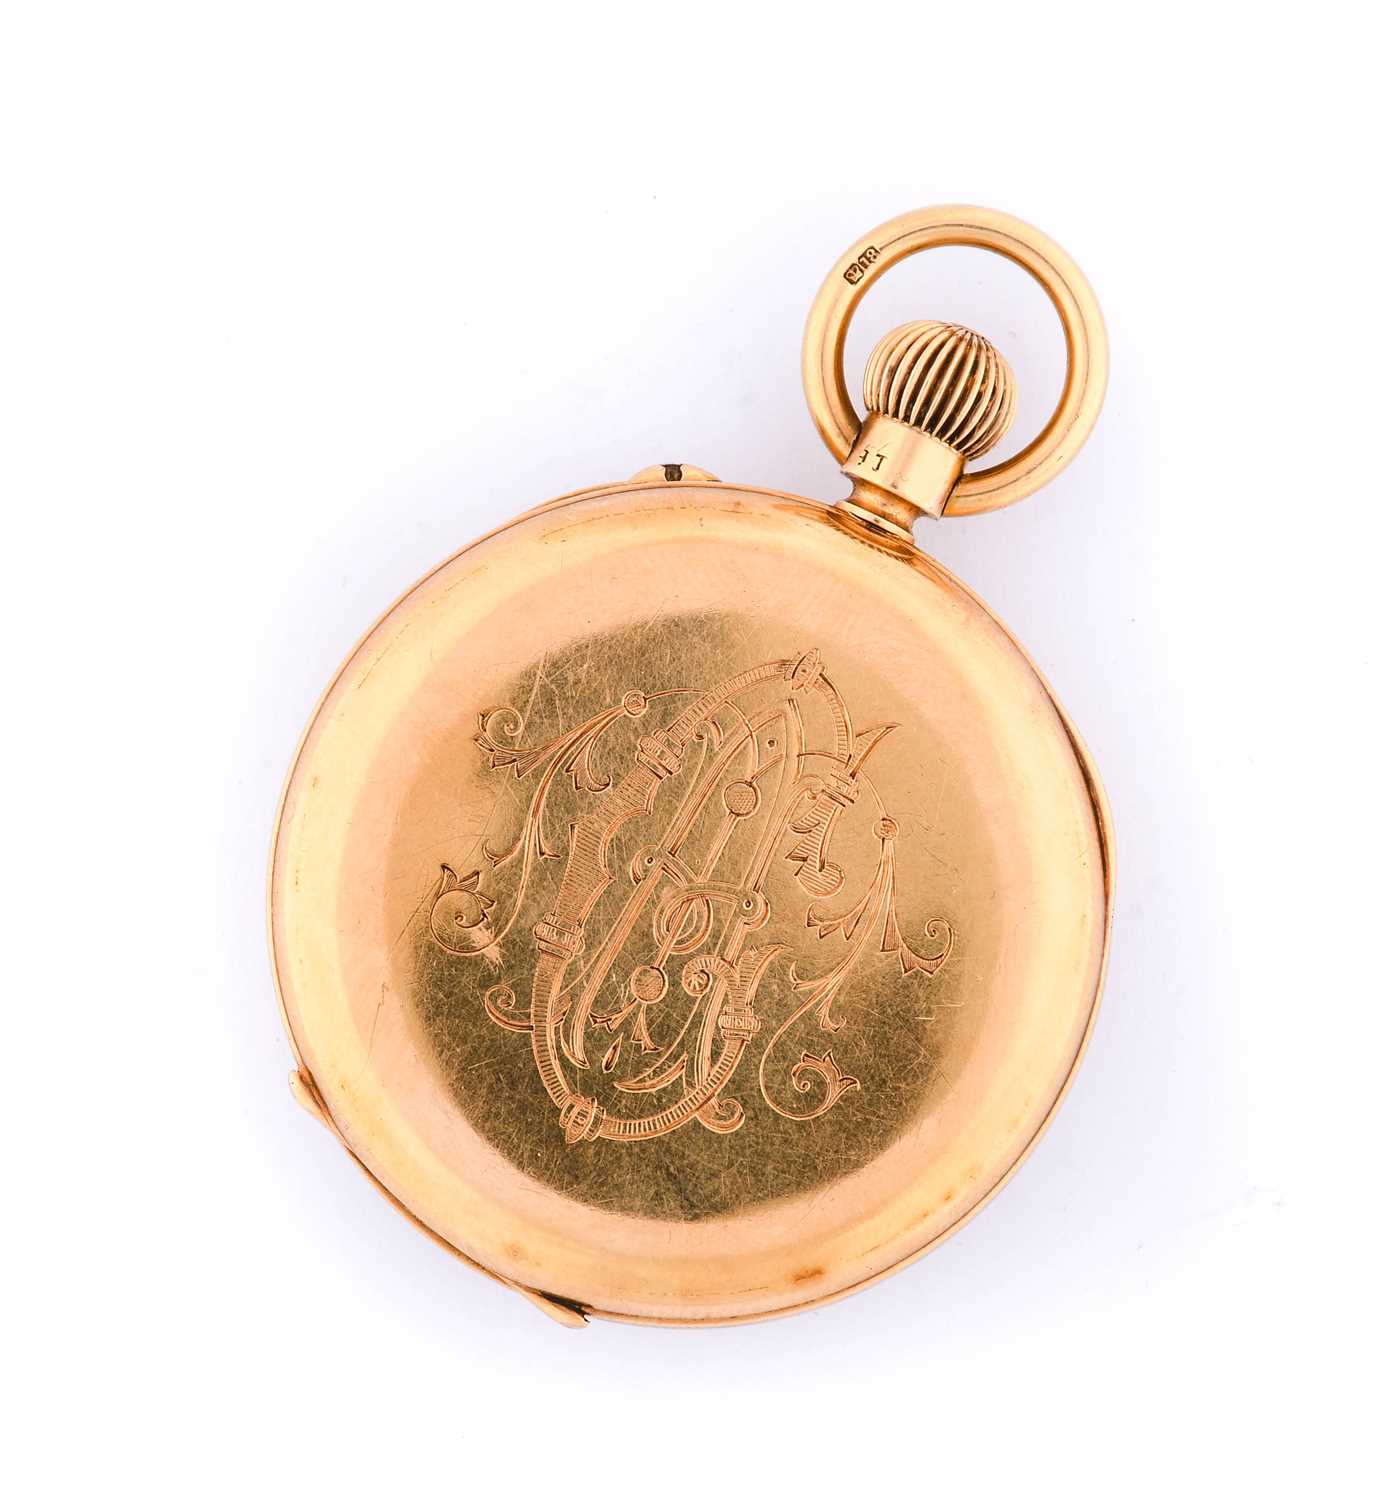 Rhodes & Sons: An 18 Carat Gold Open Faced Pocket Watch, retailed by M.Rhodes & Sons, Bradford & - Image 2 of 4